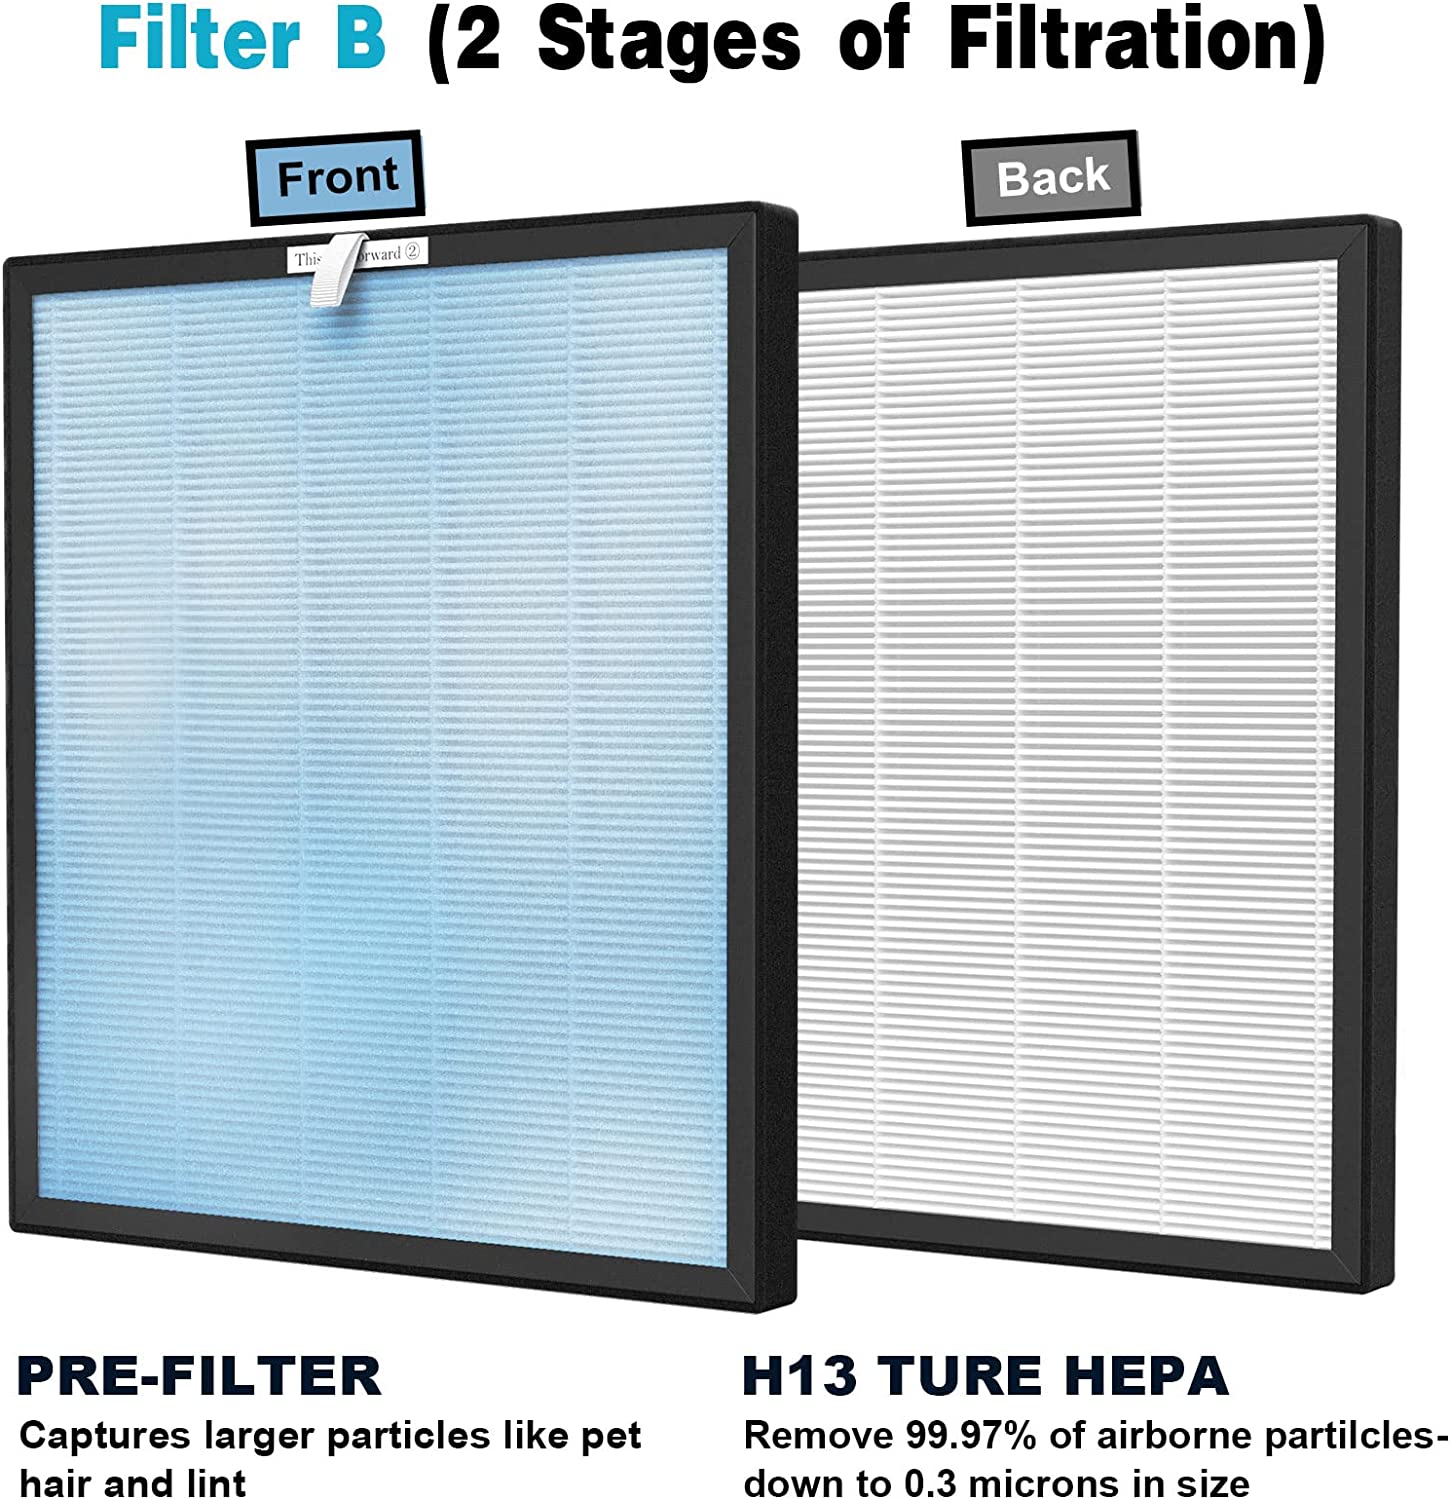 FCFMY 4 Sets Replacement Air Filters for HSP001 Smart True HEPA Purifier, 4 Stage Filtration of Fine Pre-Filter, Activated Carbon, Cold Catalyst and H13 True HEPA Filter